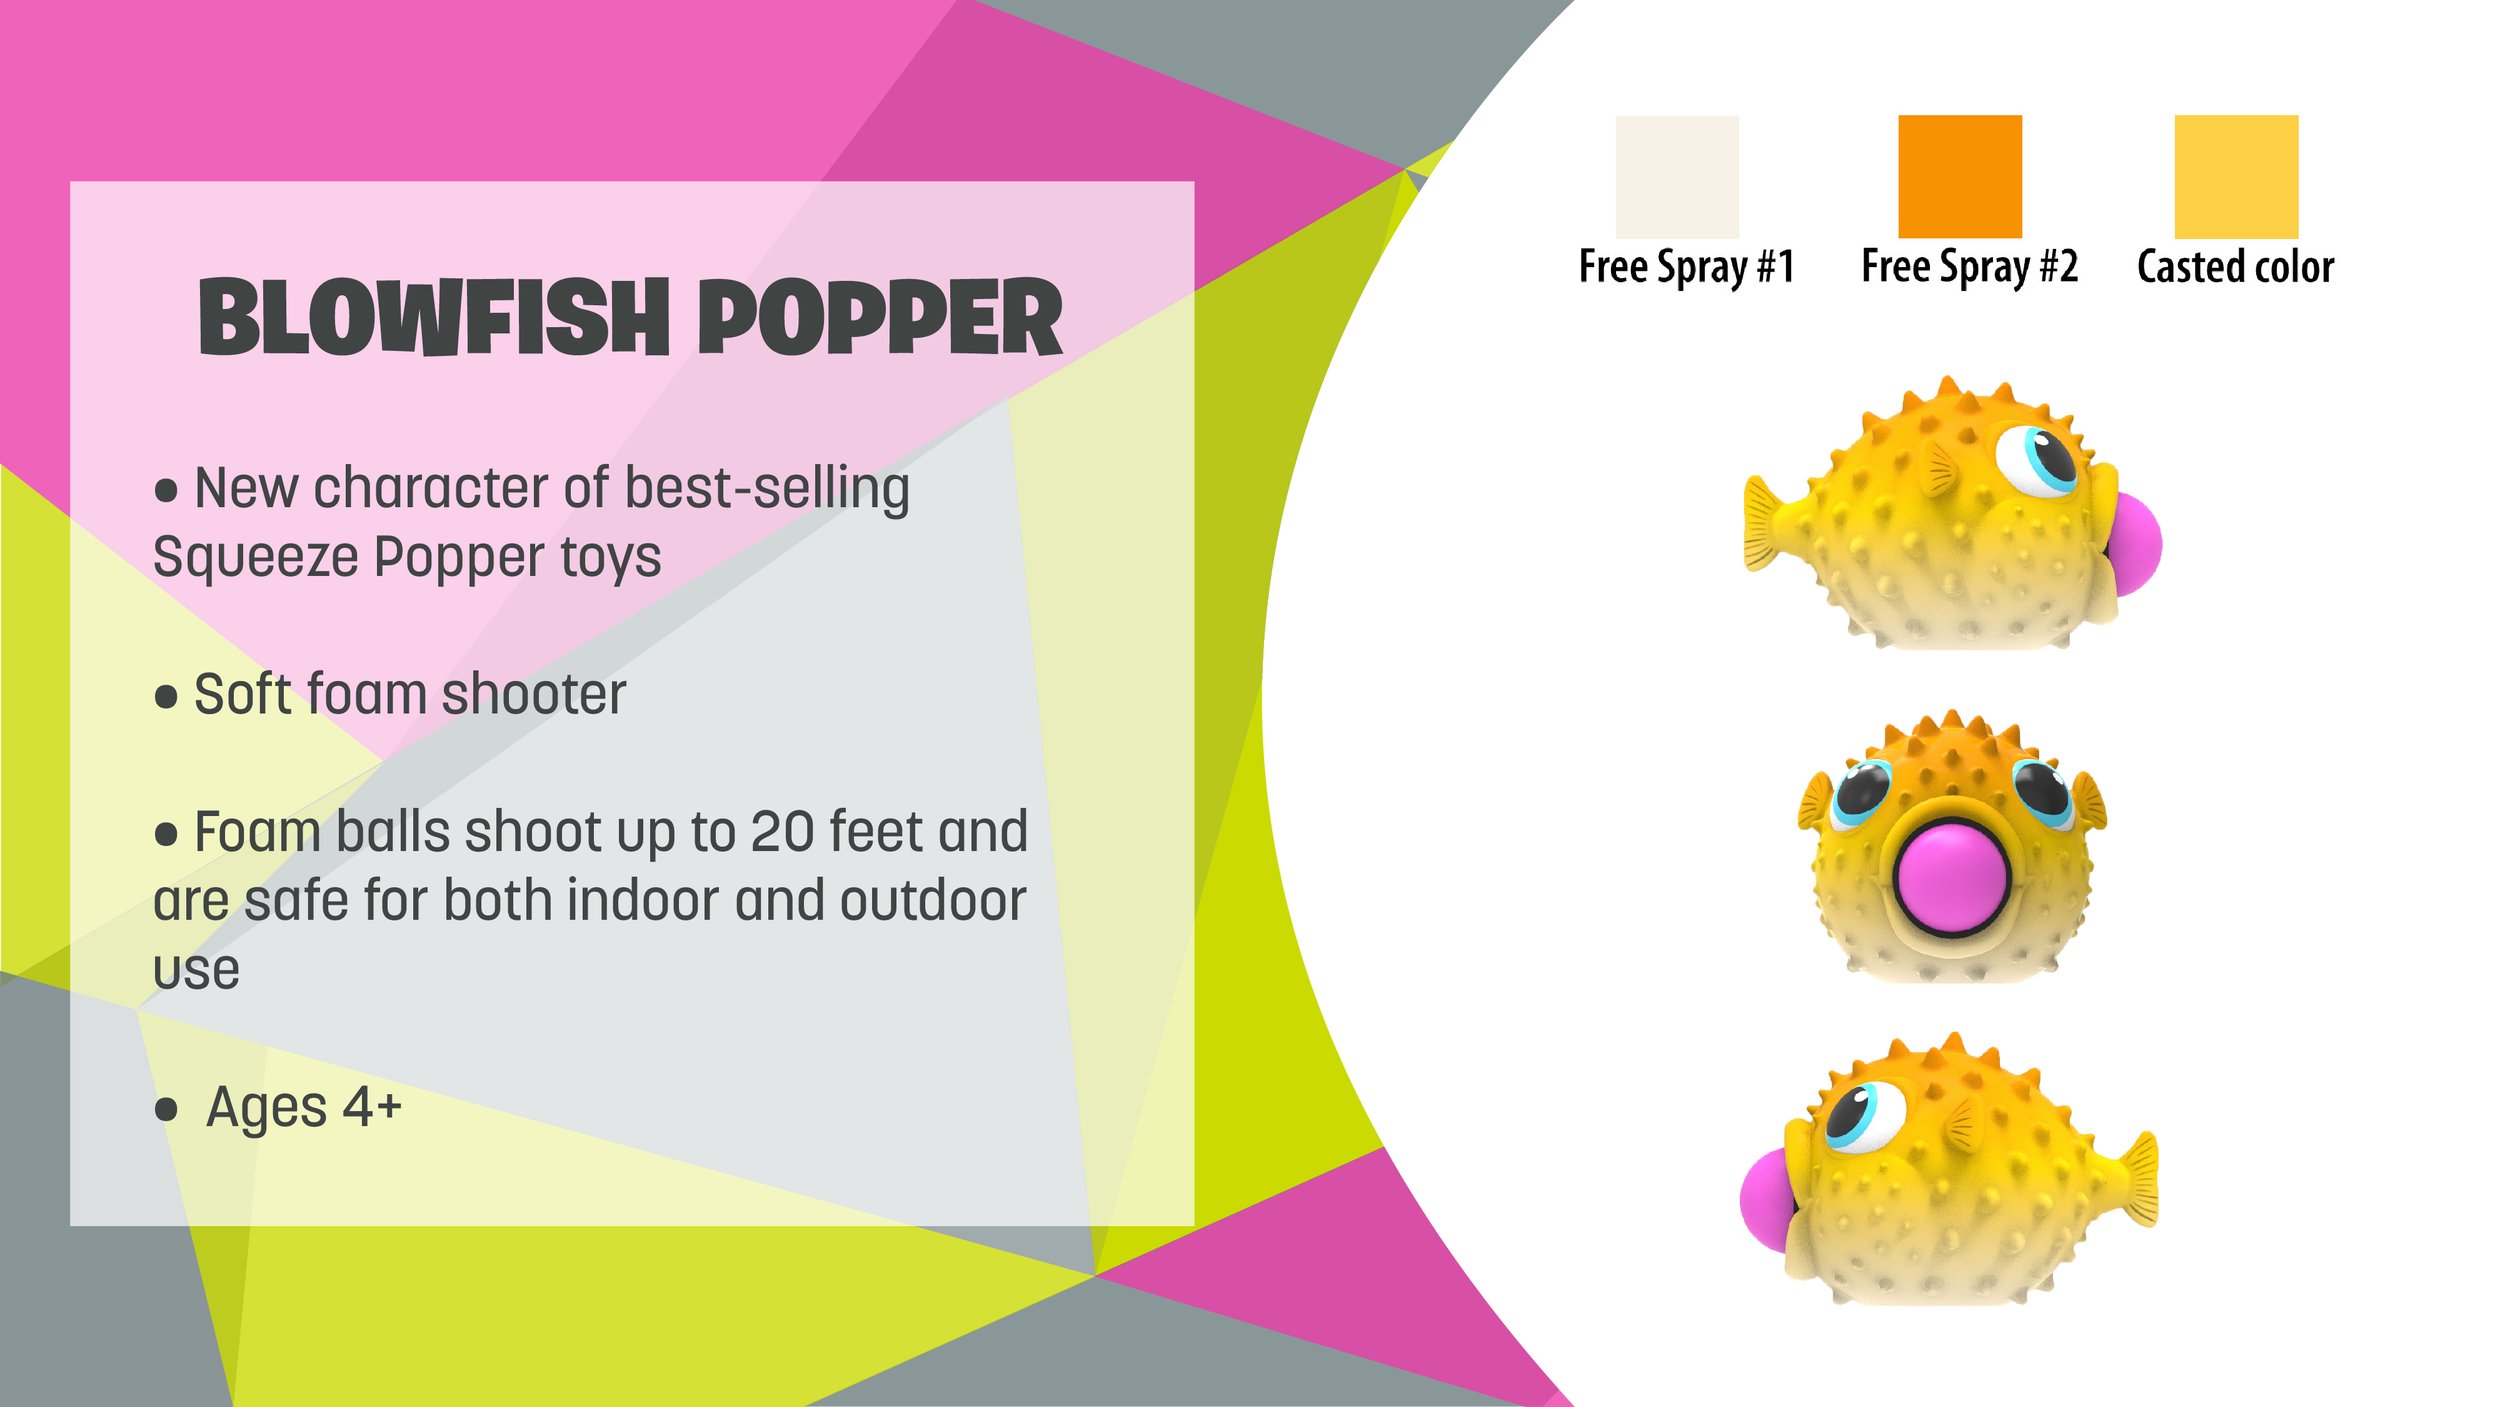 5. Product Page_Blowfish Popper.jpg